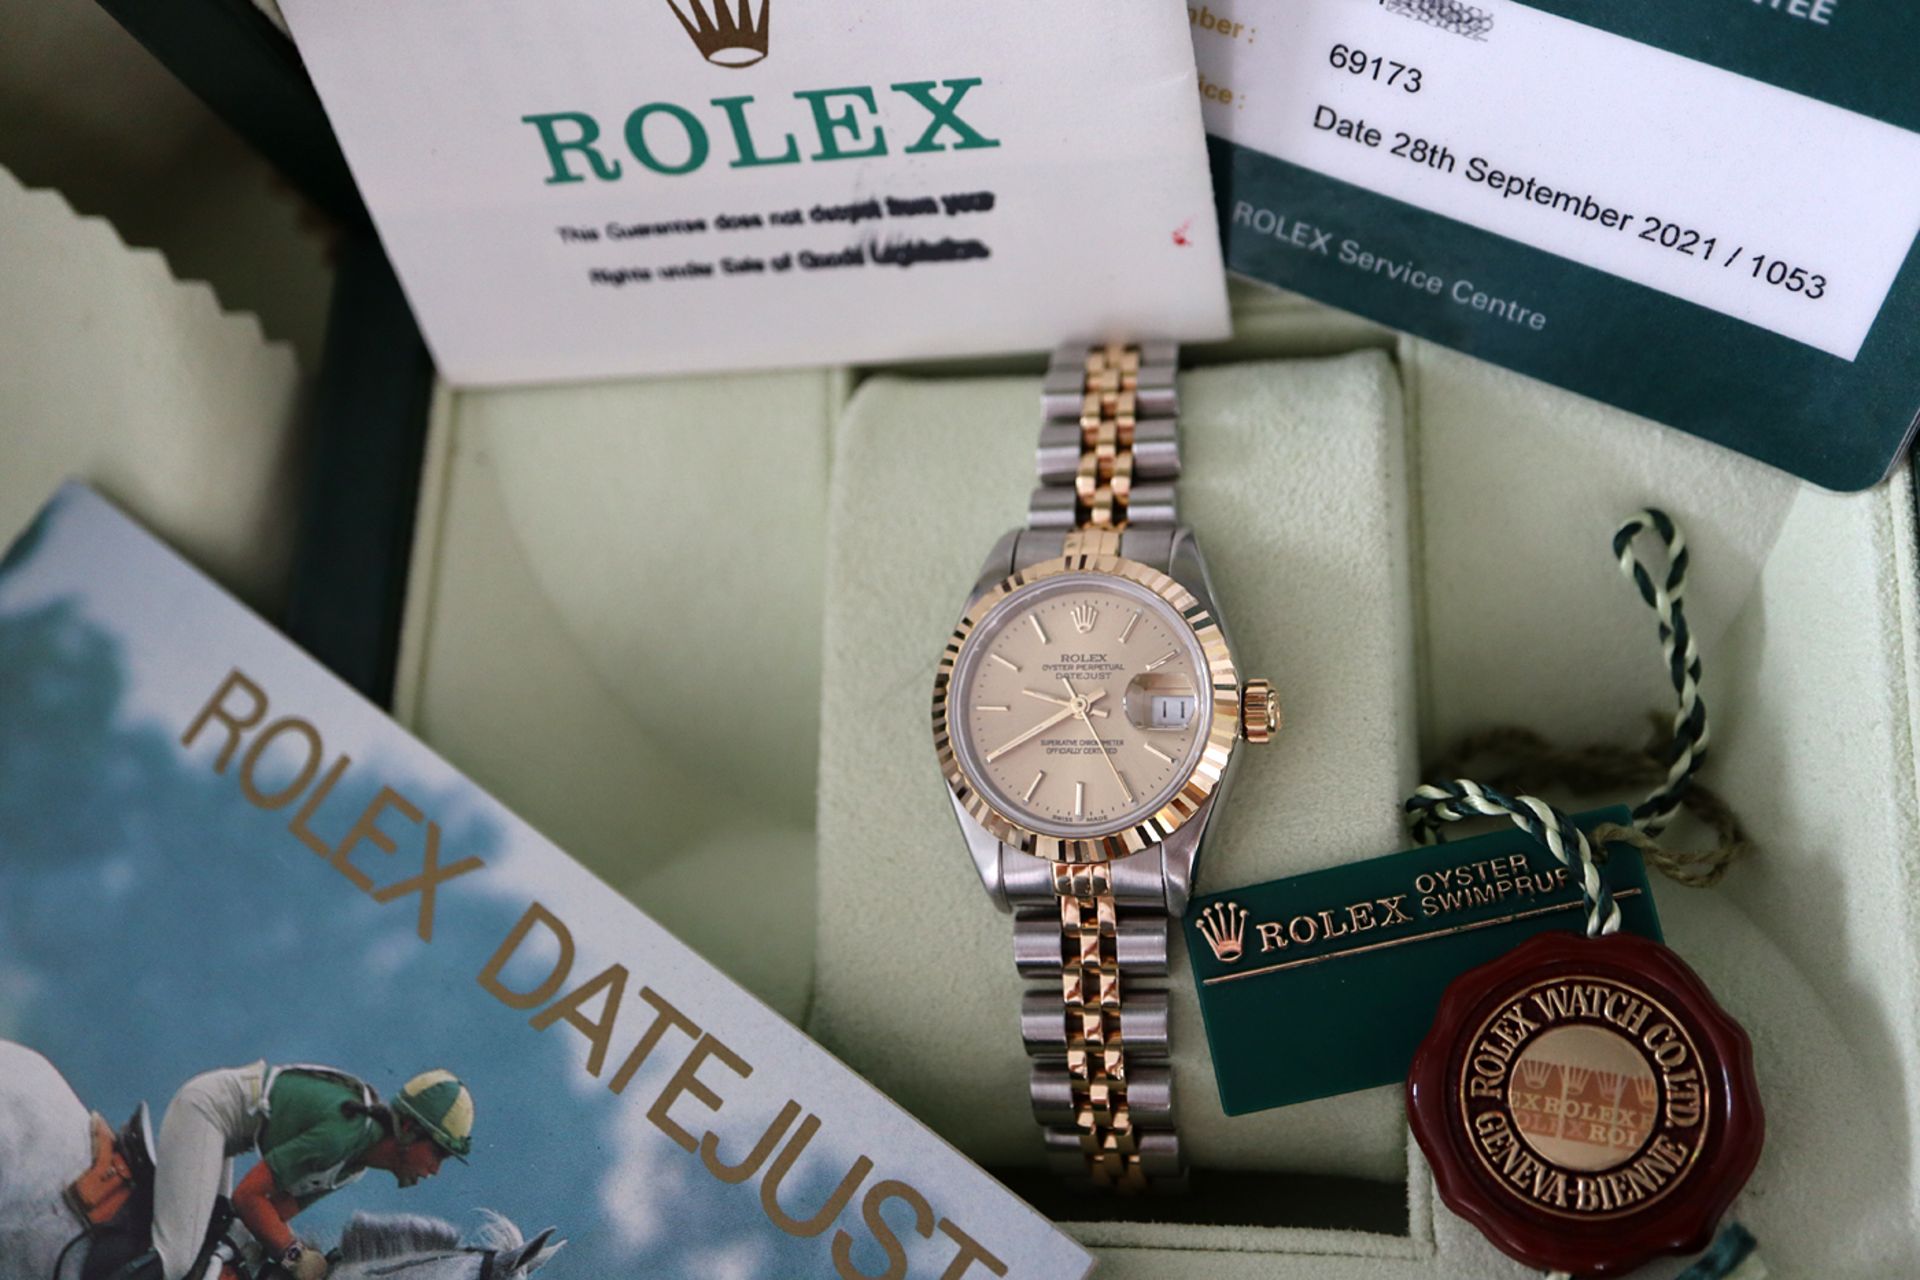 ROLEX DATEJUST 18K / STEEL REF. 69173 *CHAMPAGNE* - FULL SET WITH CERTIFICATE, BOX & TAGS ETC - Image 9 of 9